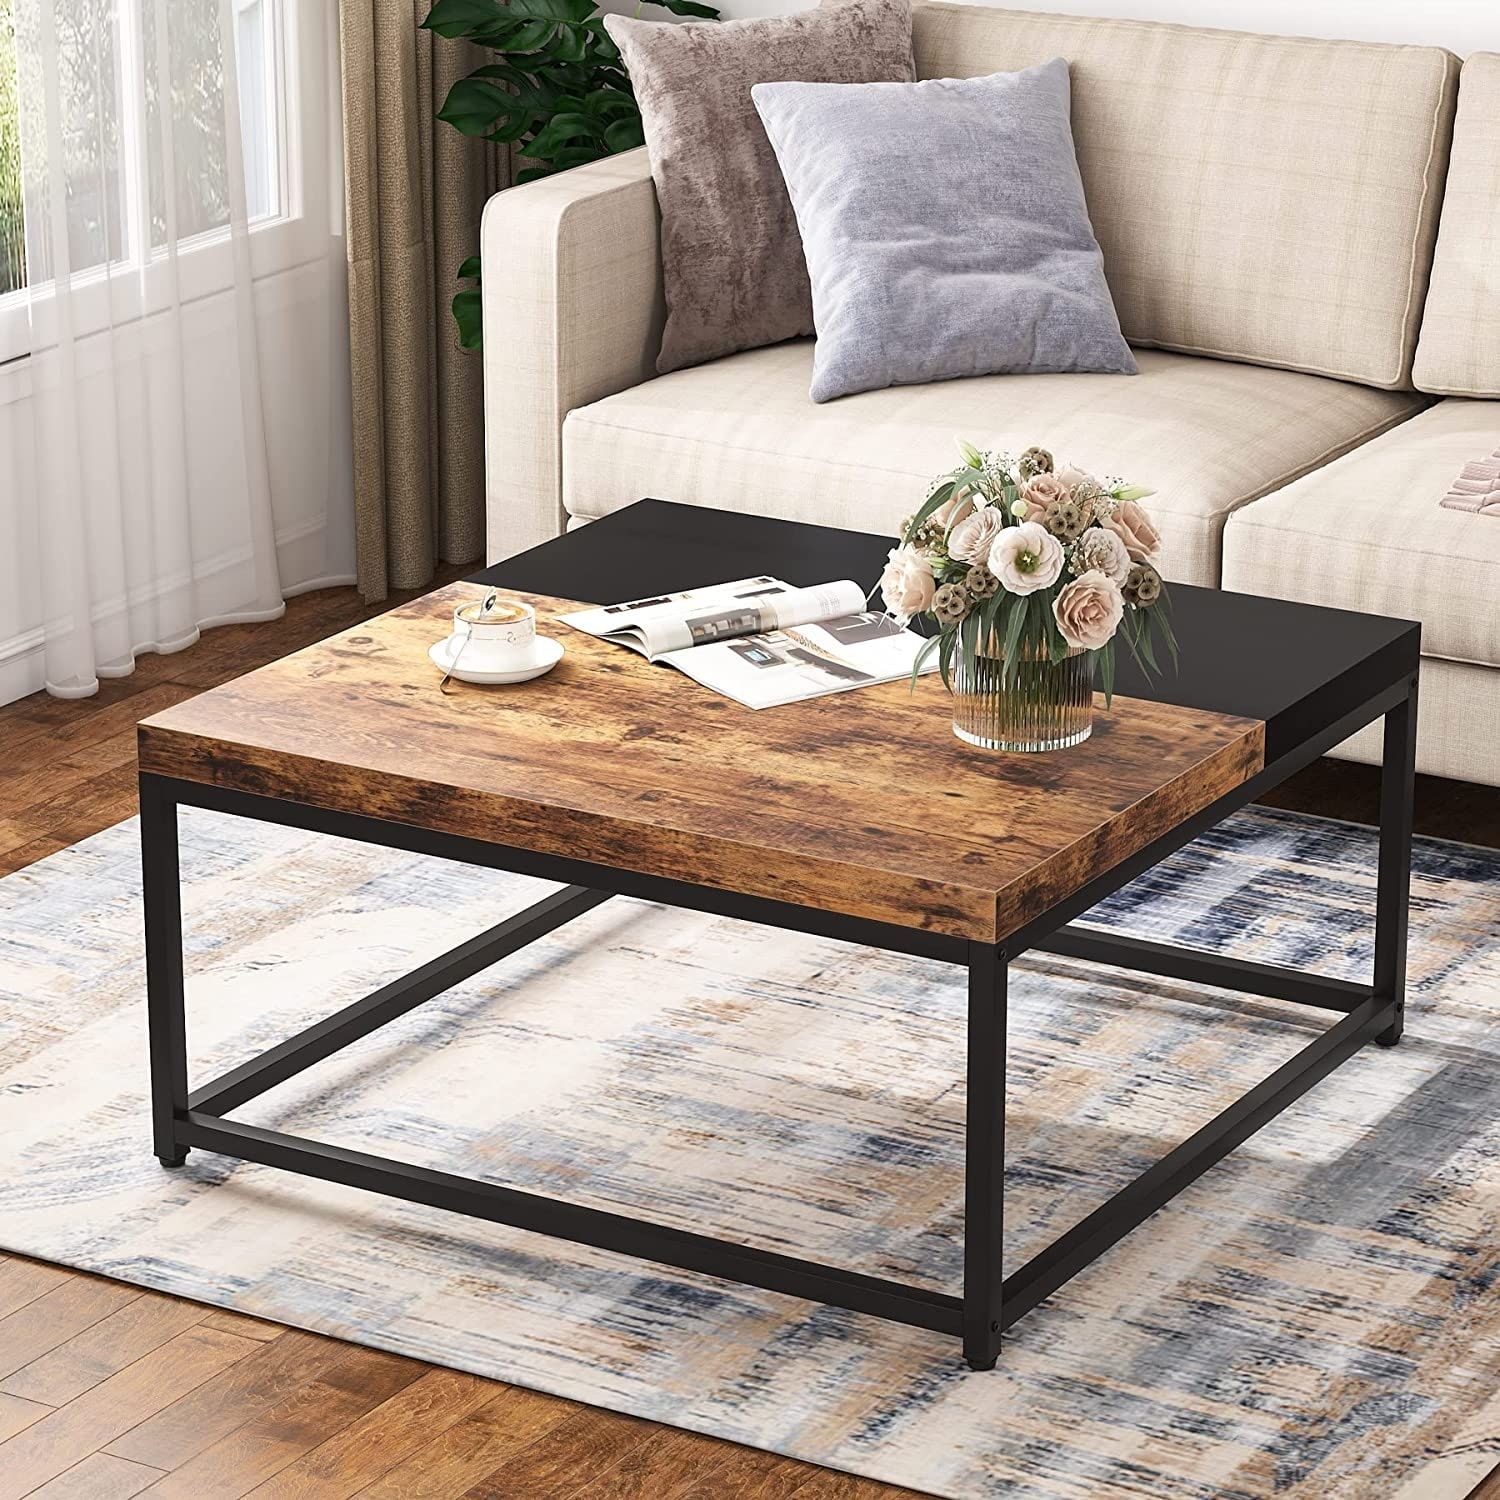 Large Coffee Table, Square Cocktail Table For Living Room Rustic Brown –  40"w Undefined 40"d Undefined 20"h – Bed Bath & Beyond – 35348388 Throughout Transitional Square Coffee Tables (Photo 10 of 15)